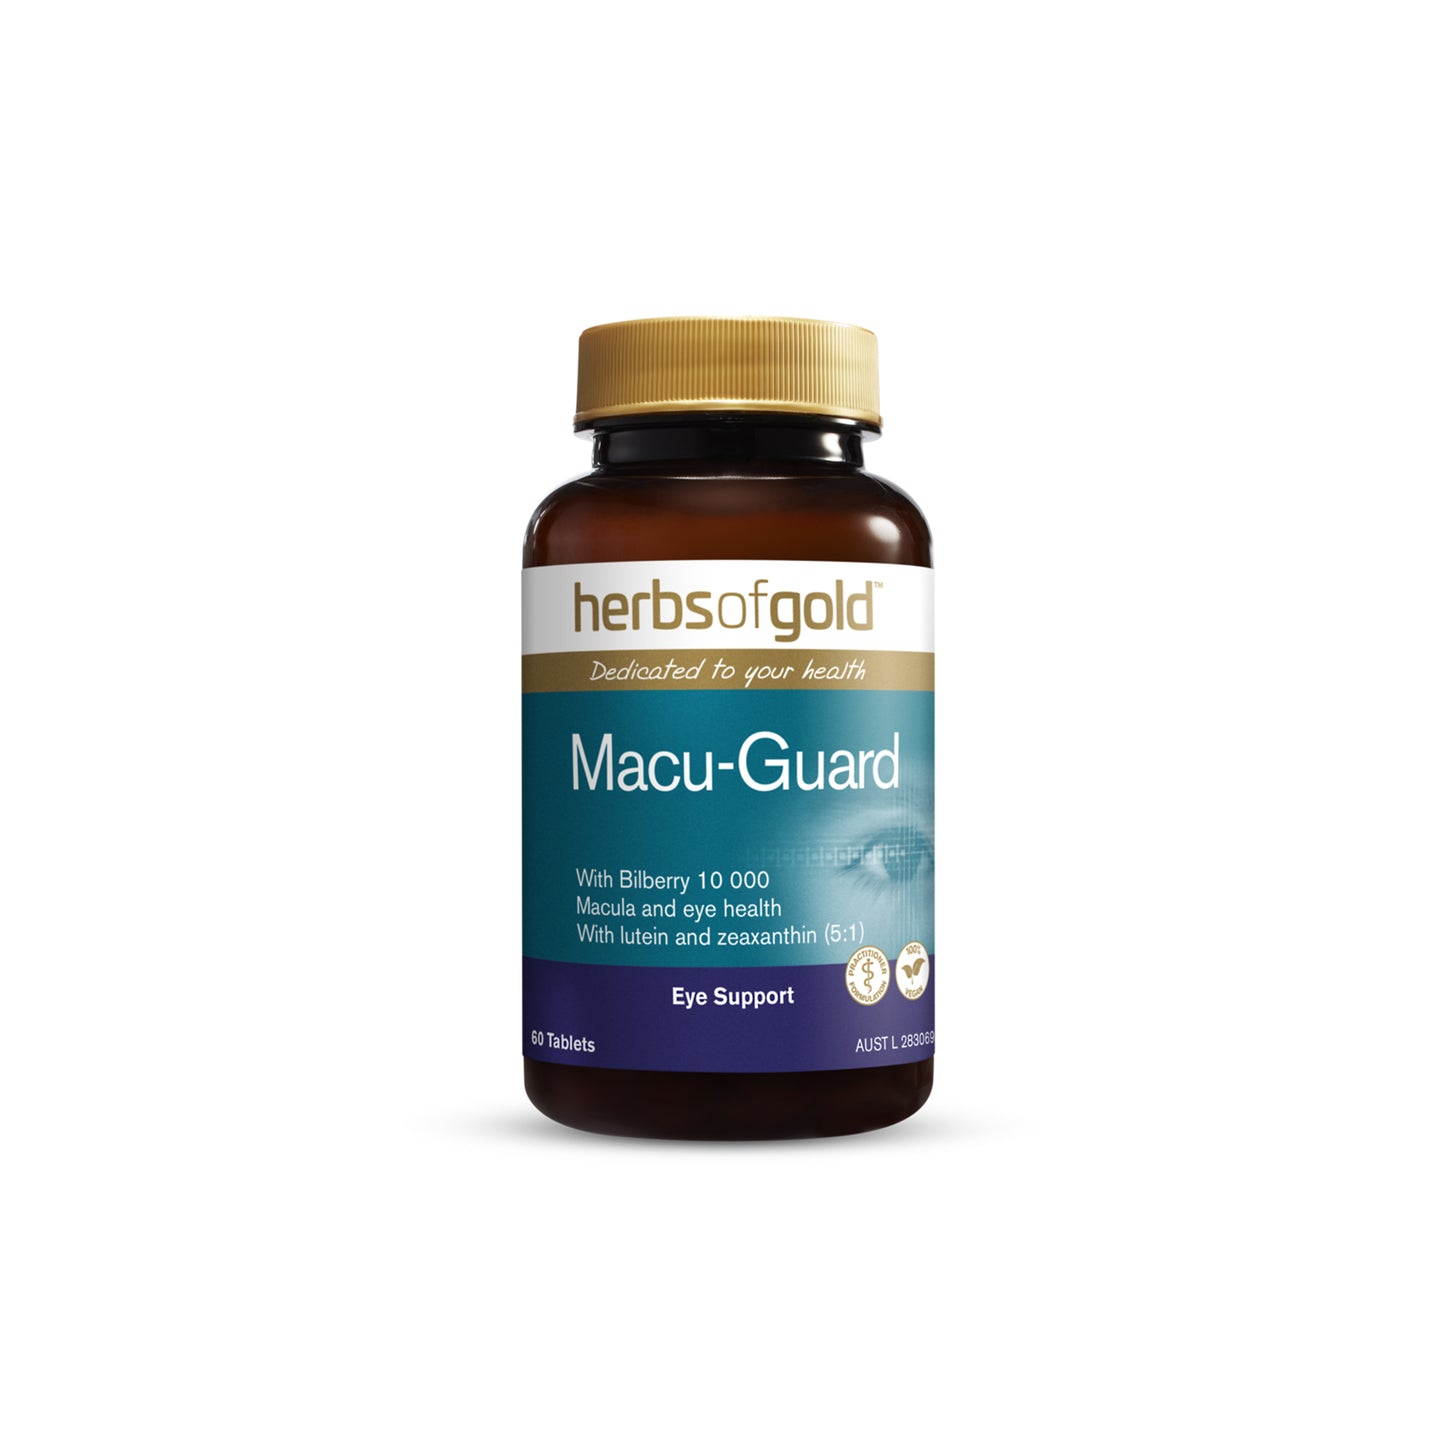 Macu-Guard - 60 Tablets - Herbs of Gold | MLC Space